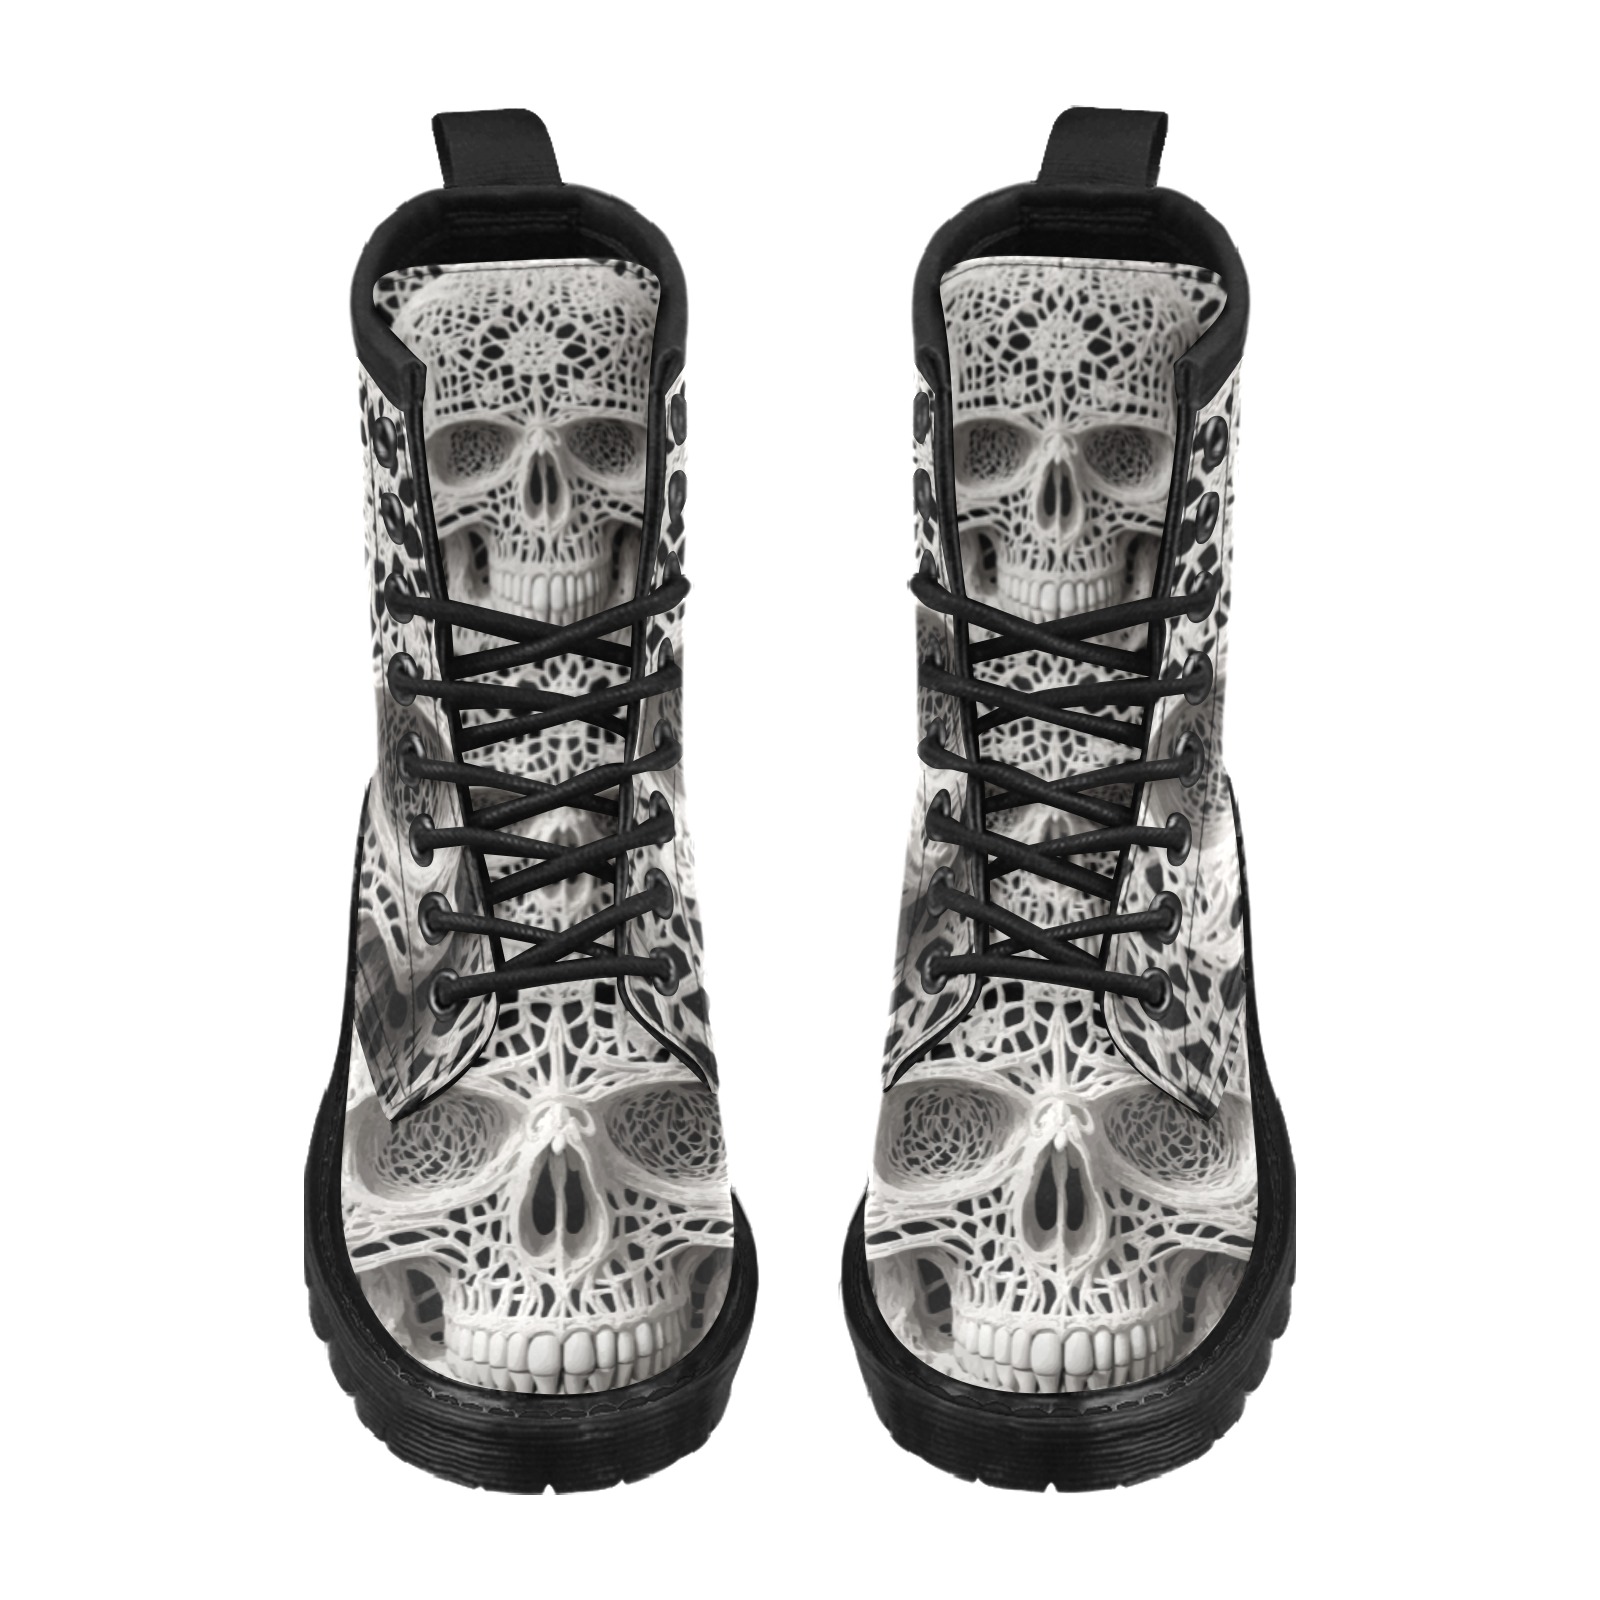 Funny elegant skull made of lace macrame Women's PU Leather Martin Boots (Model 402H)